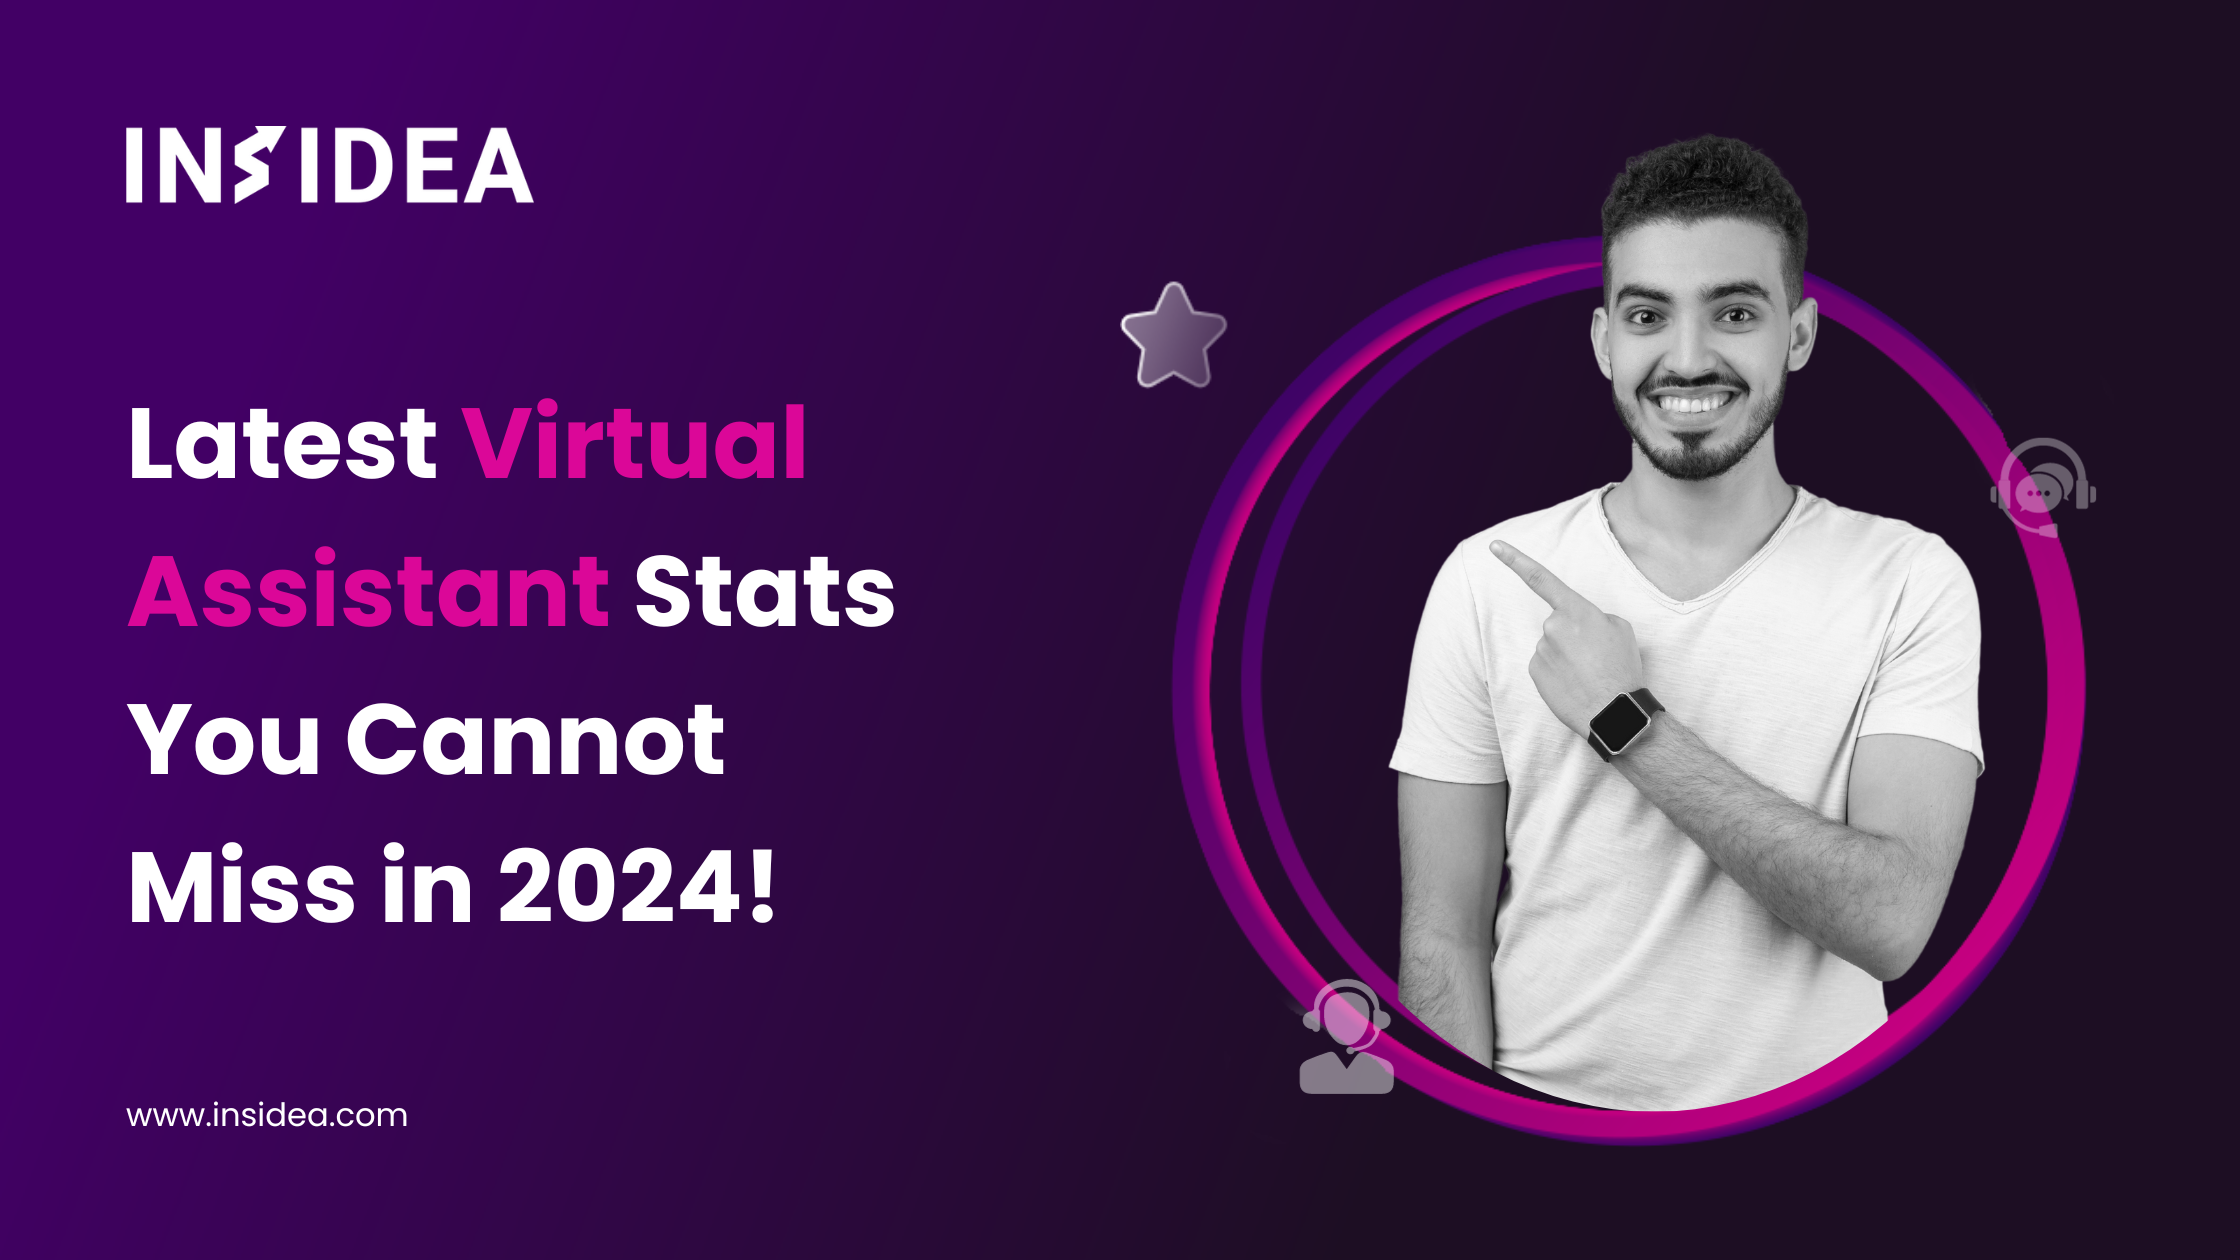 Latest Virtual Assistant Stats You Cannot Miss in 2024!